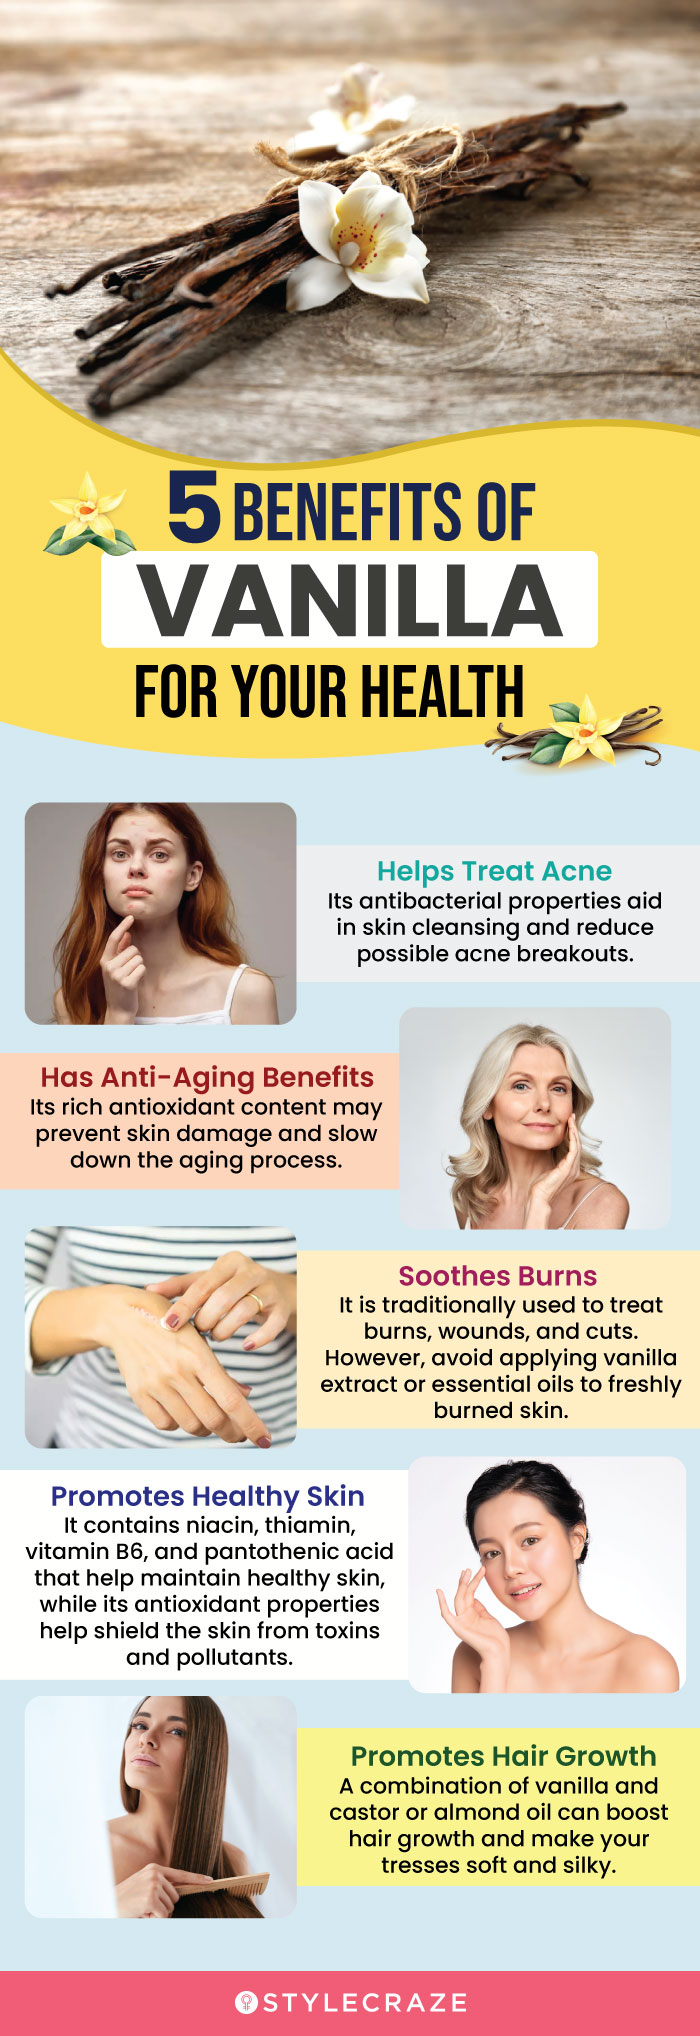 5 benefits of vanilla for your health [infographic]